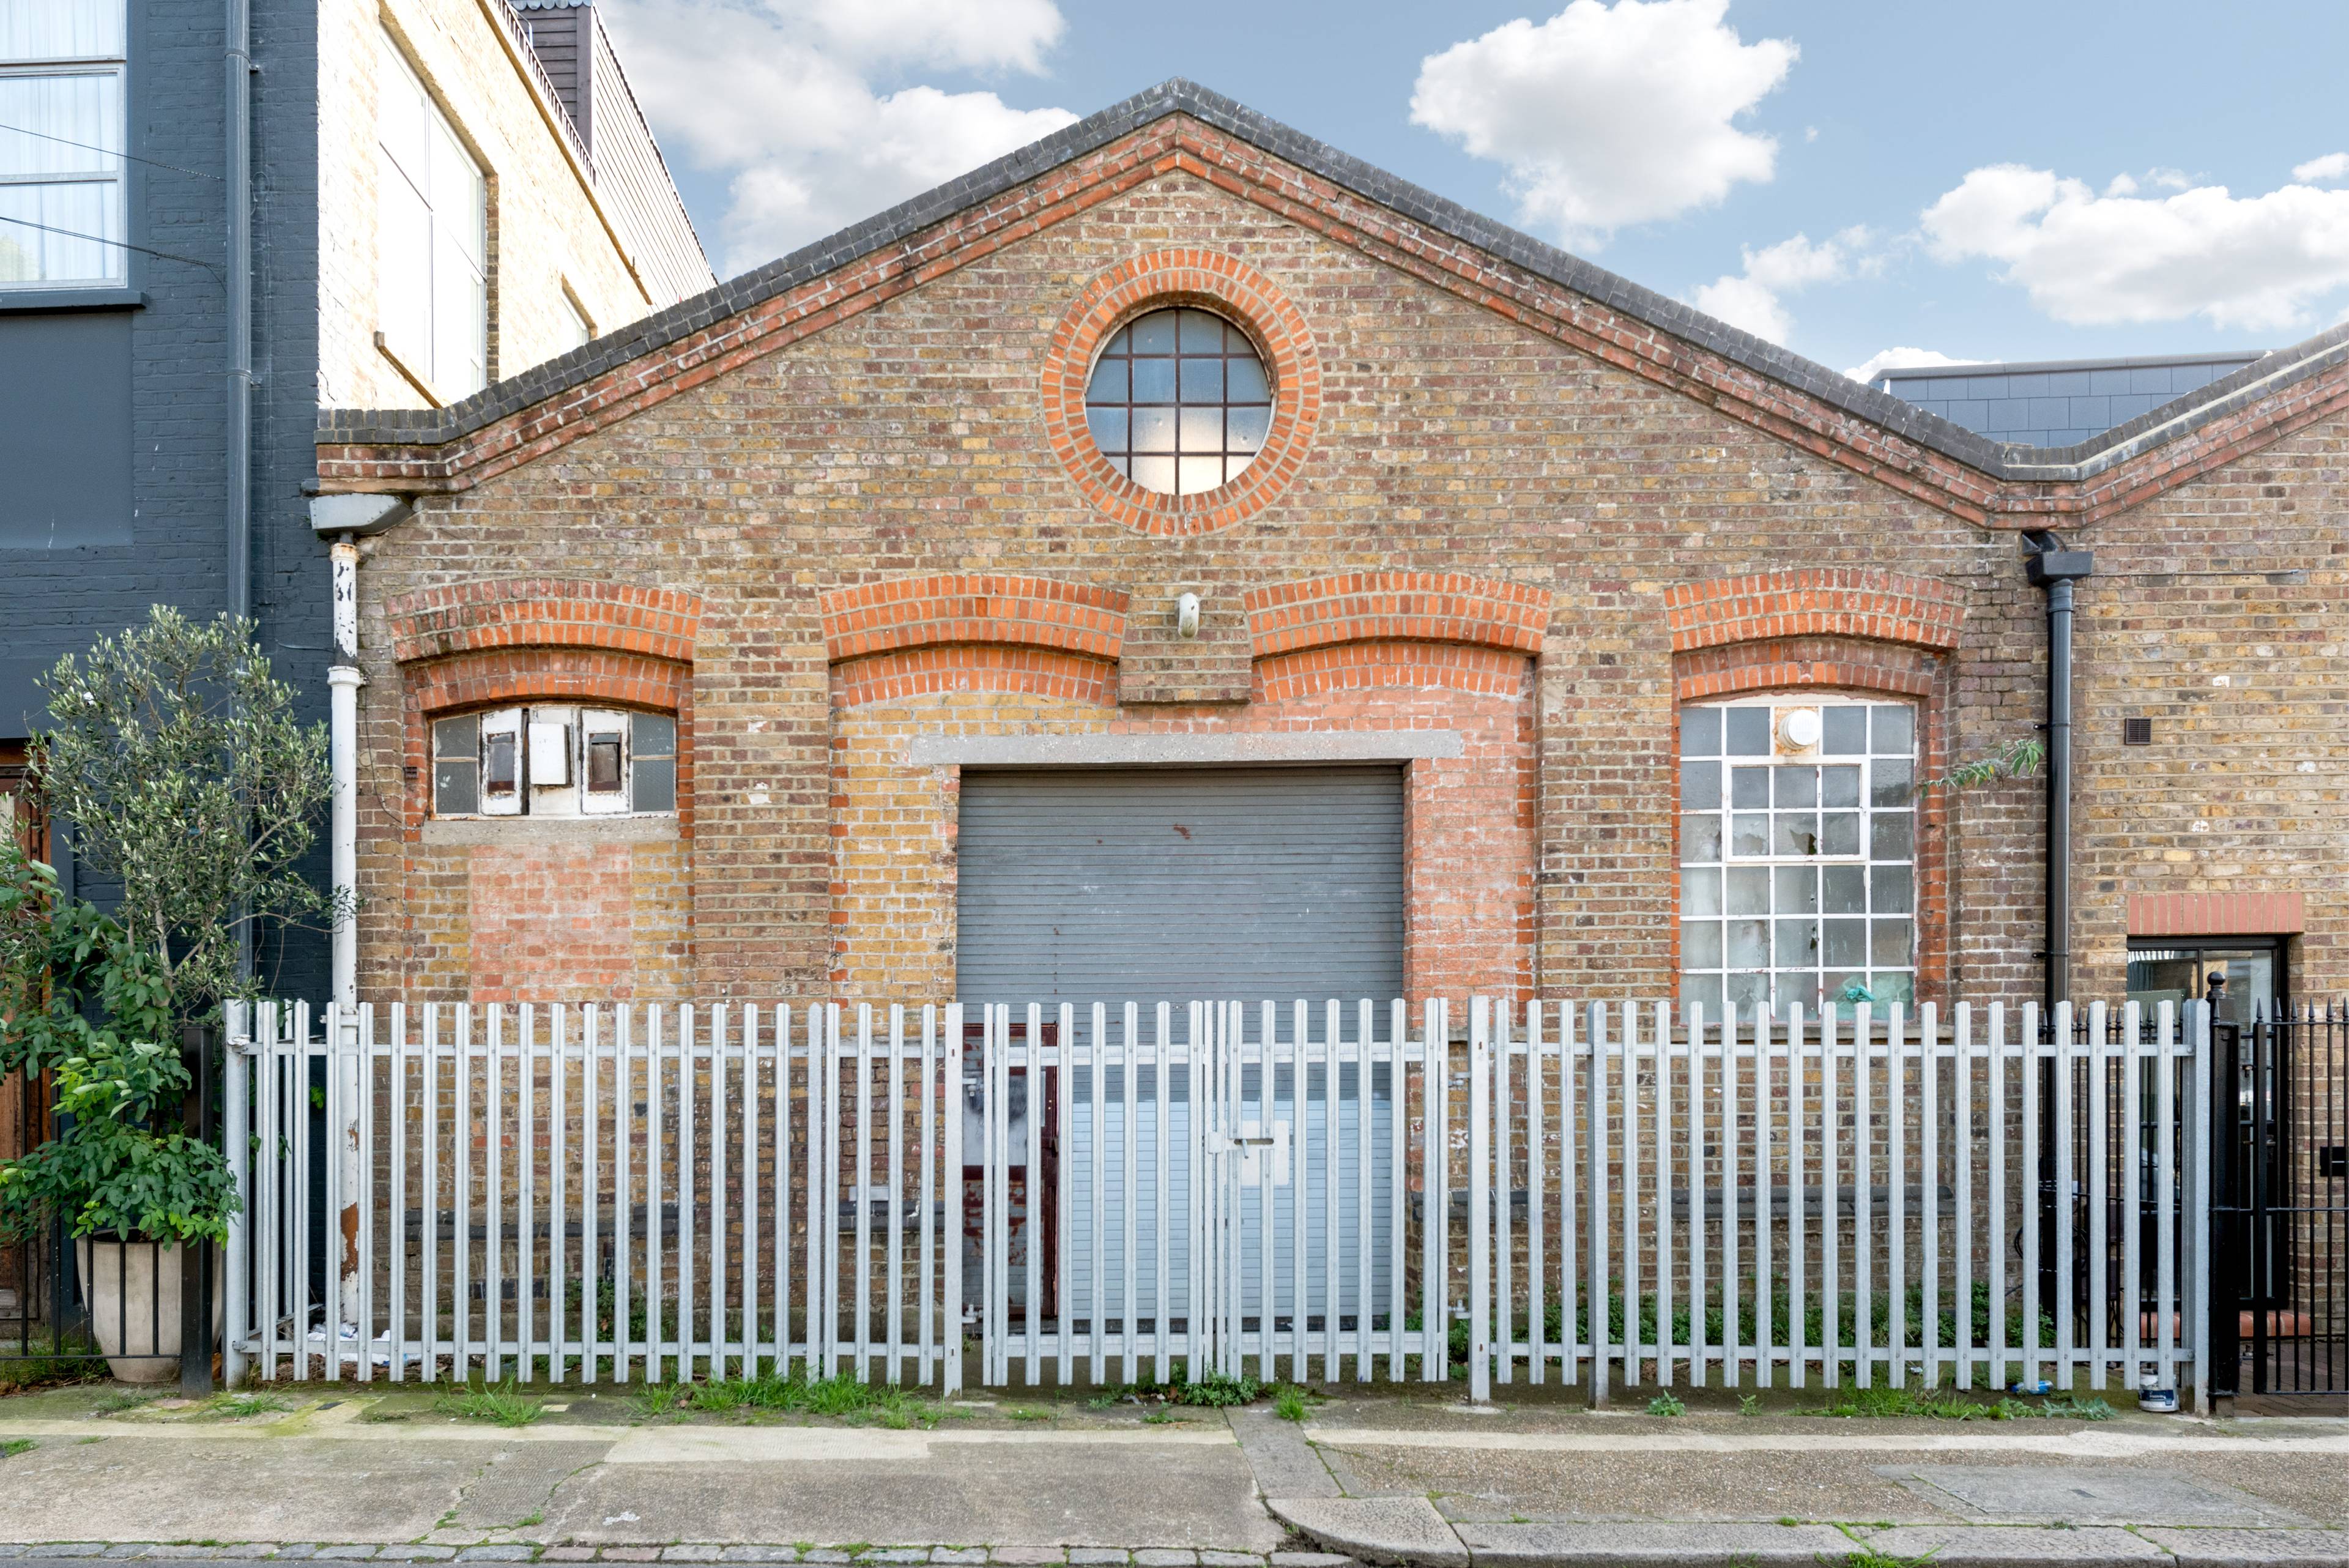 Development opportunity with full planning permission to convert an existing warehouse building into three residential apartments.